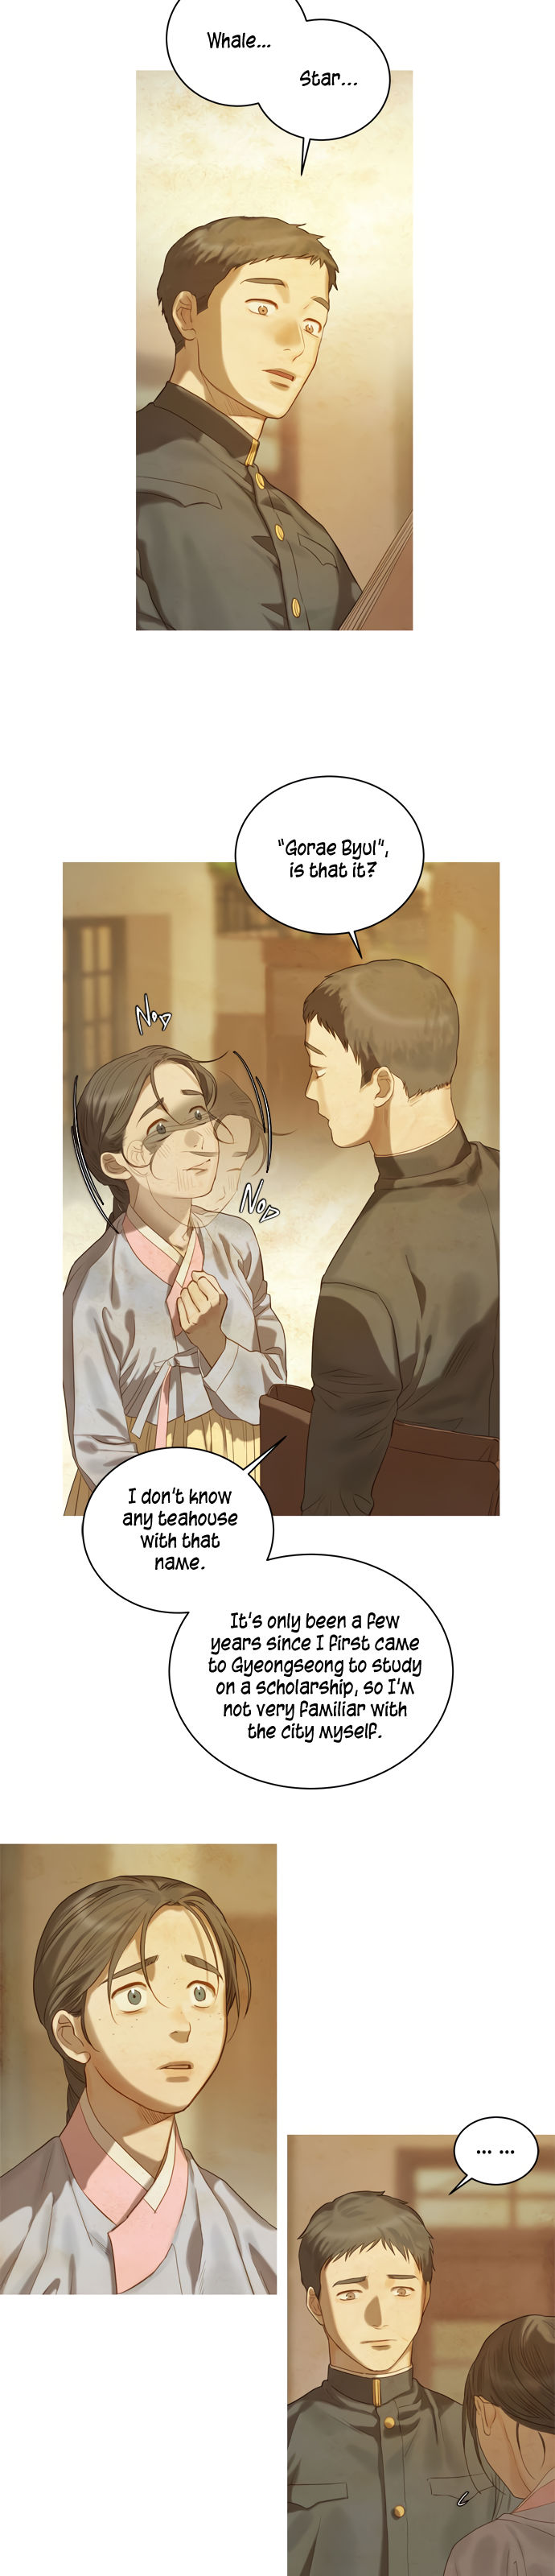 Gorae Byul - The Gyeongseong Mermaid - Chapter 17 Page 3